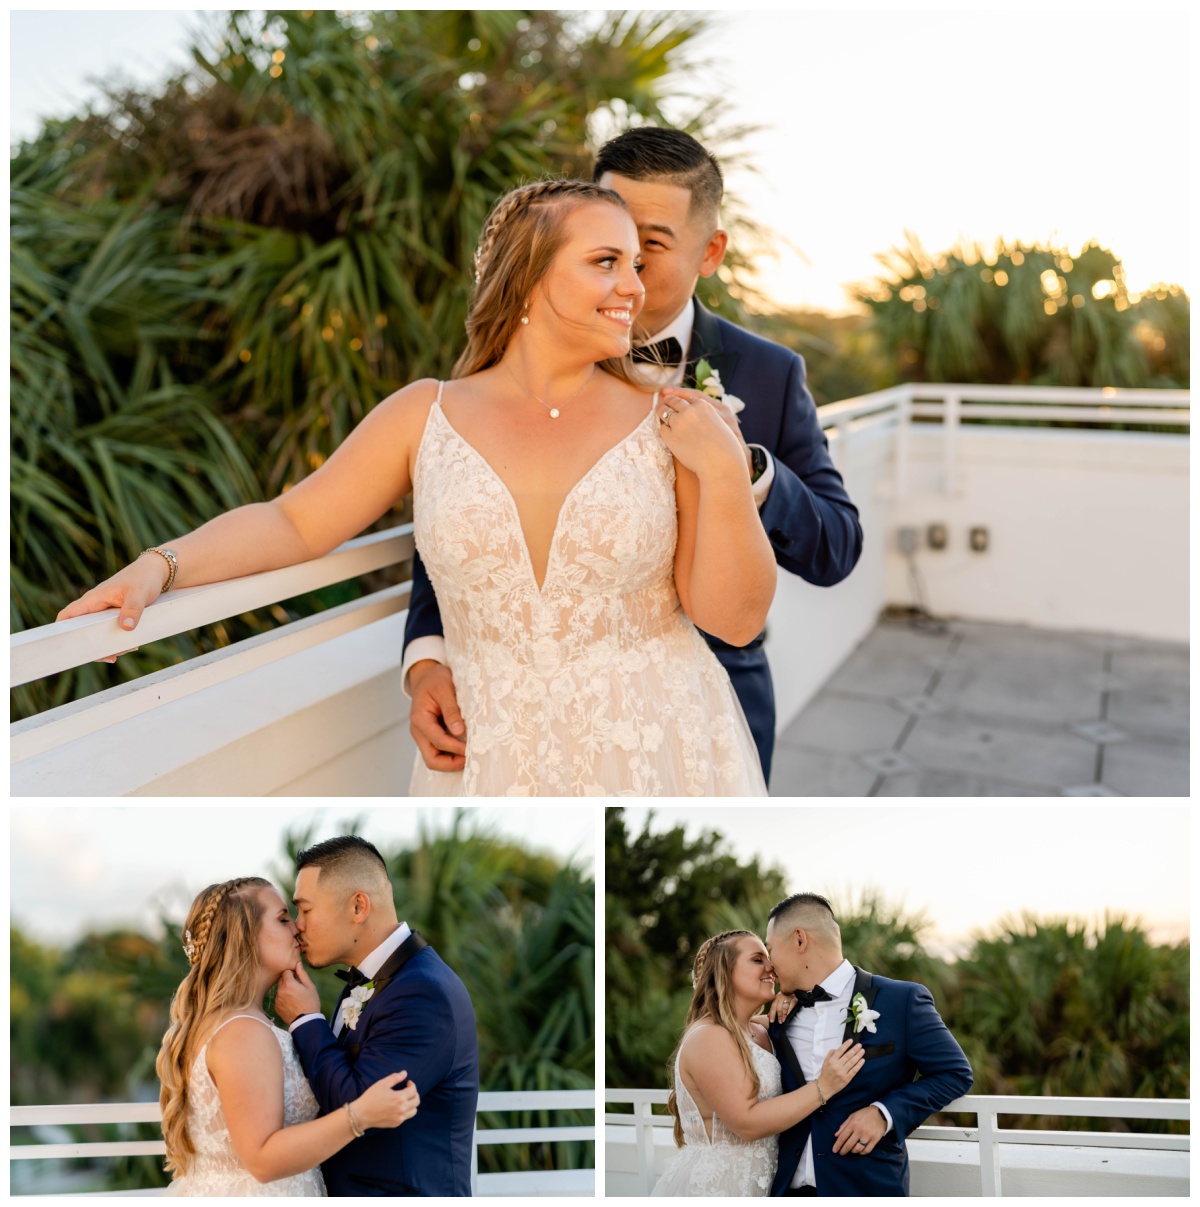 Bride and groom kiss at sunset during Jensen Beach wedding day